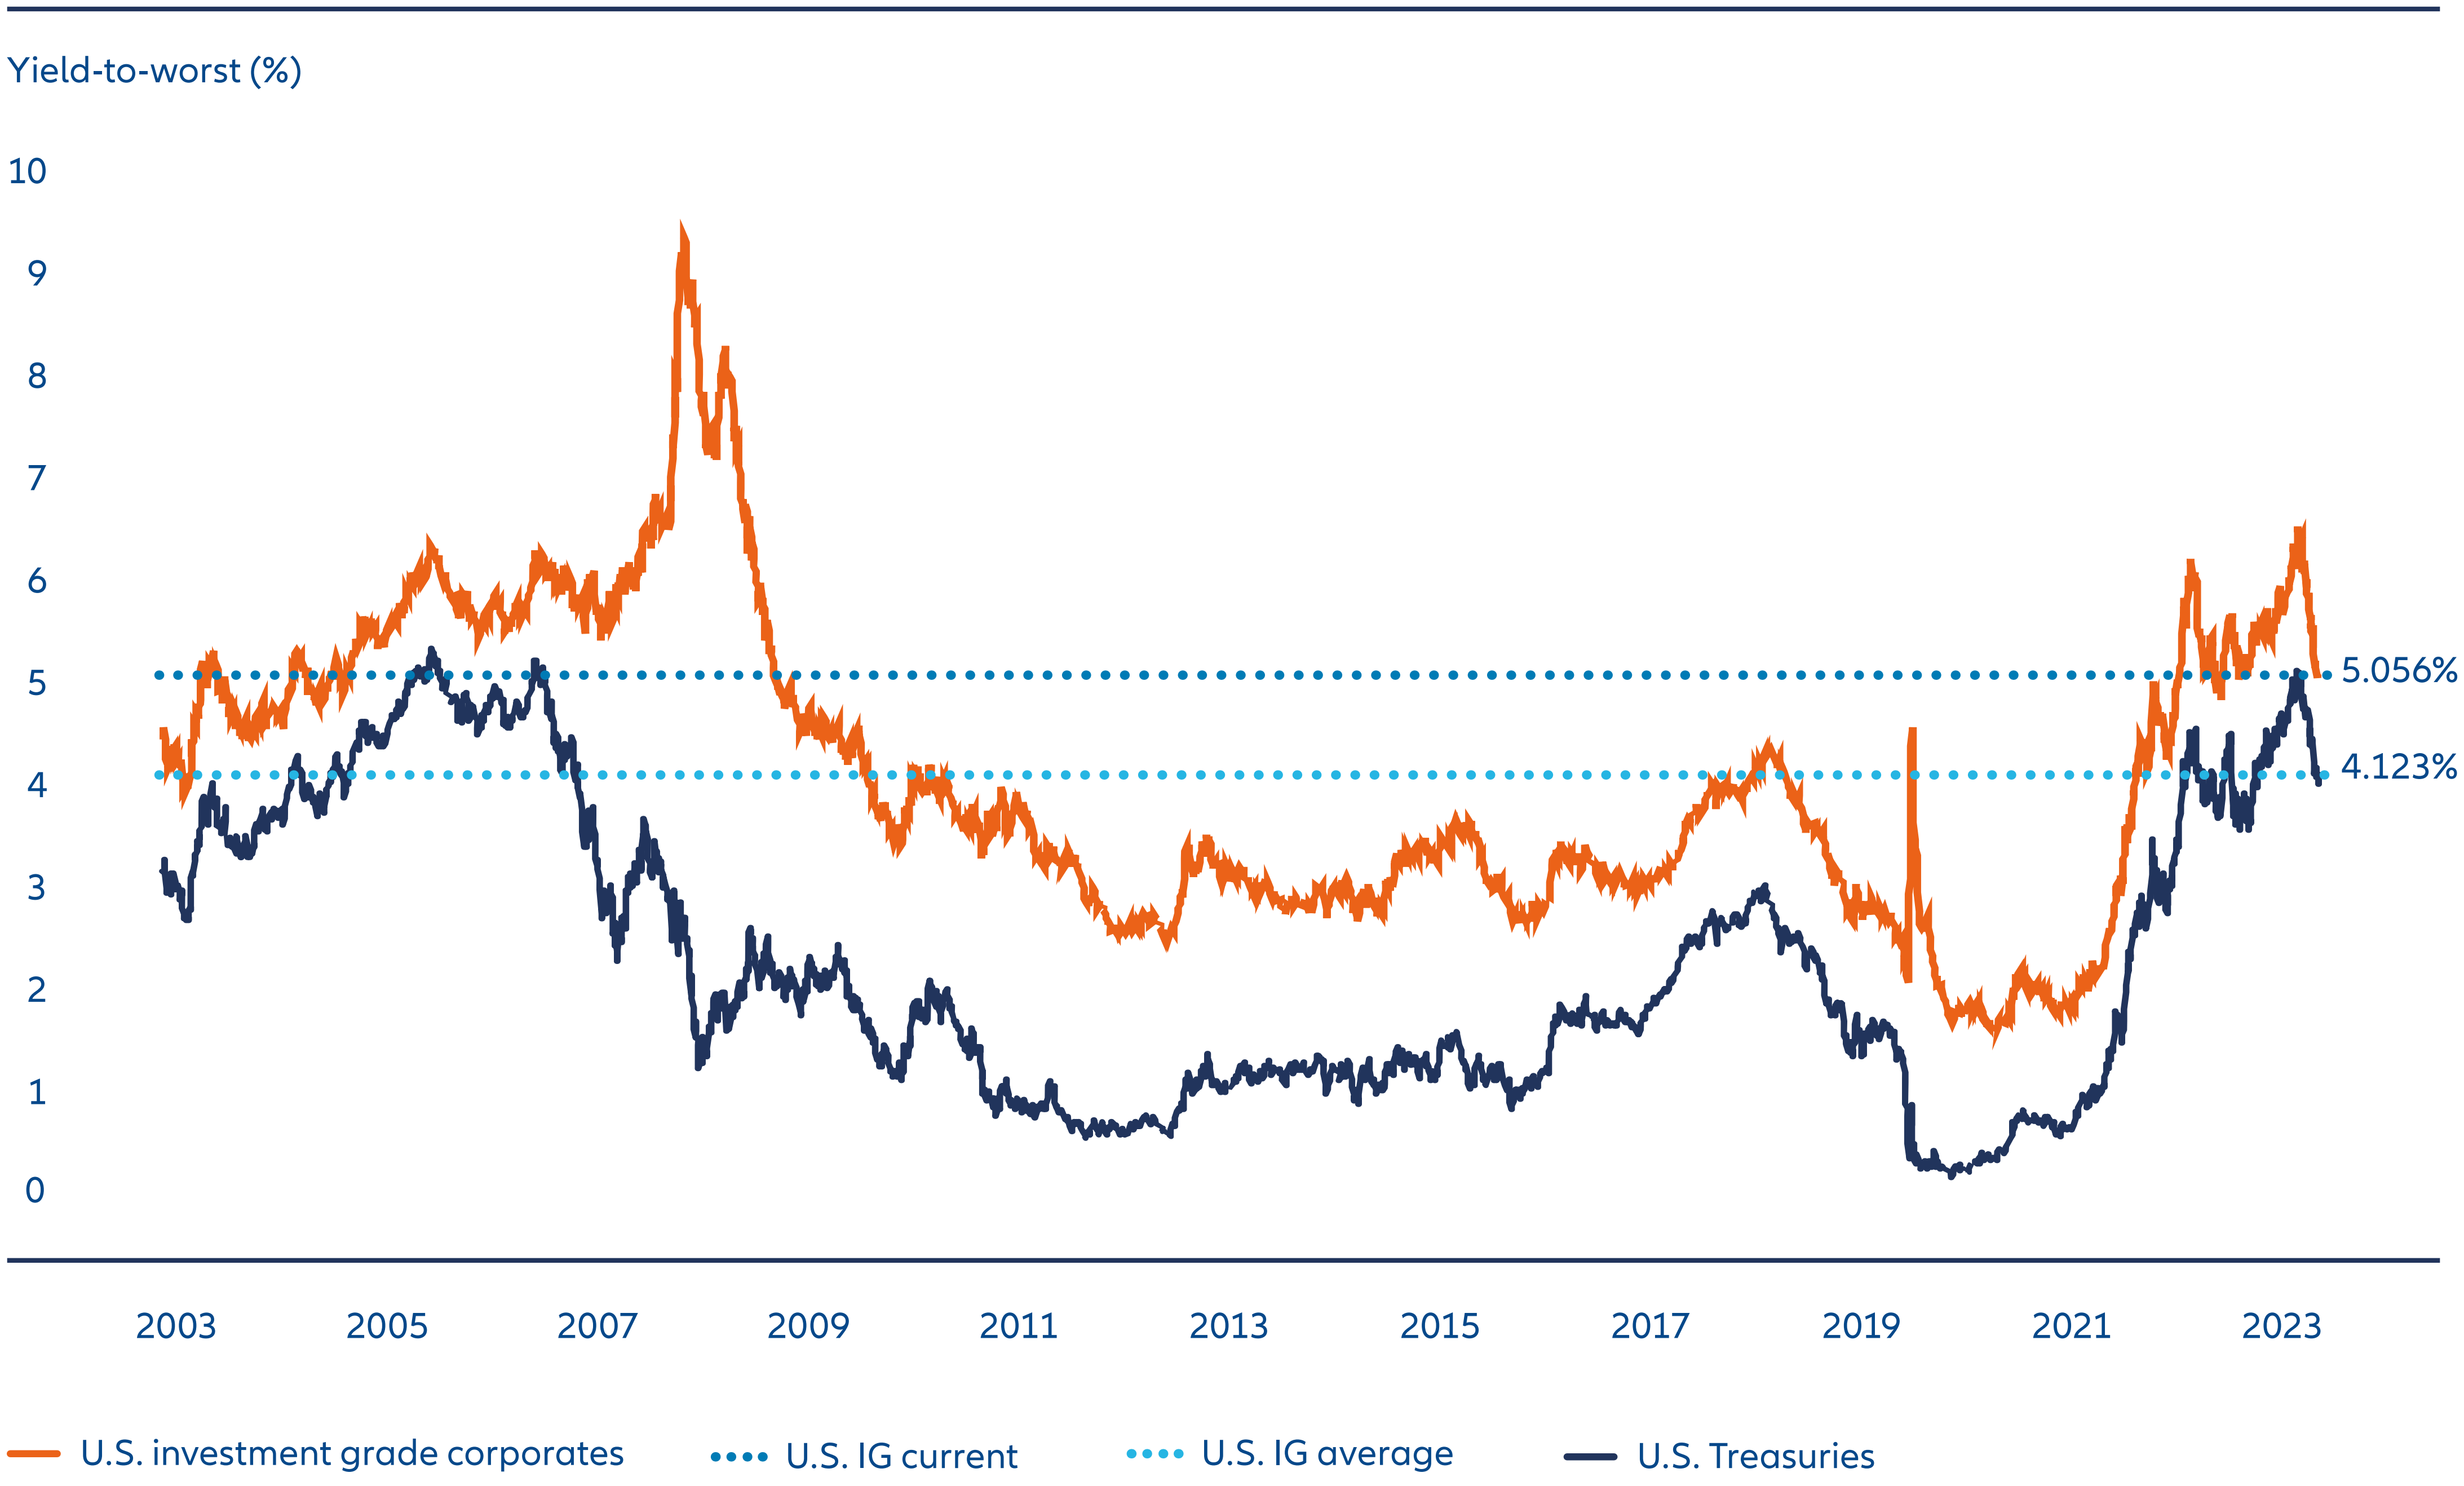 Exhibit 5: Yields of IG bonds are above their long-term average